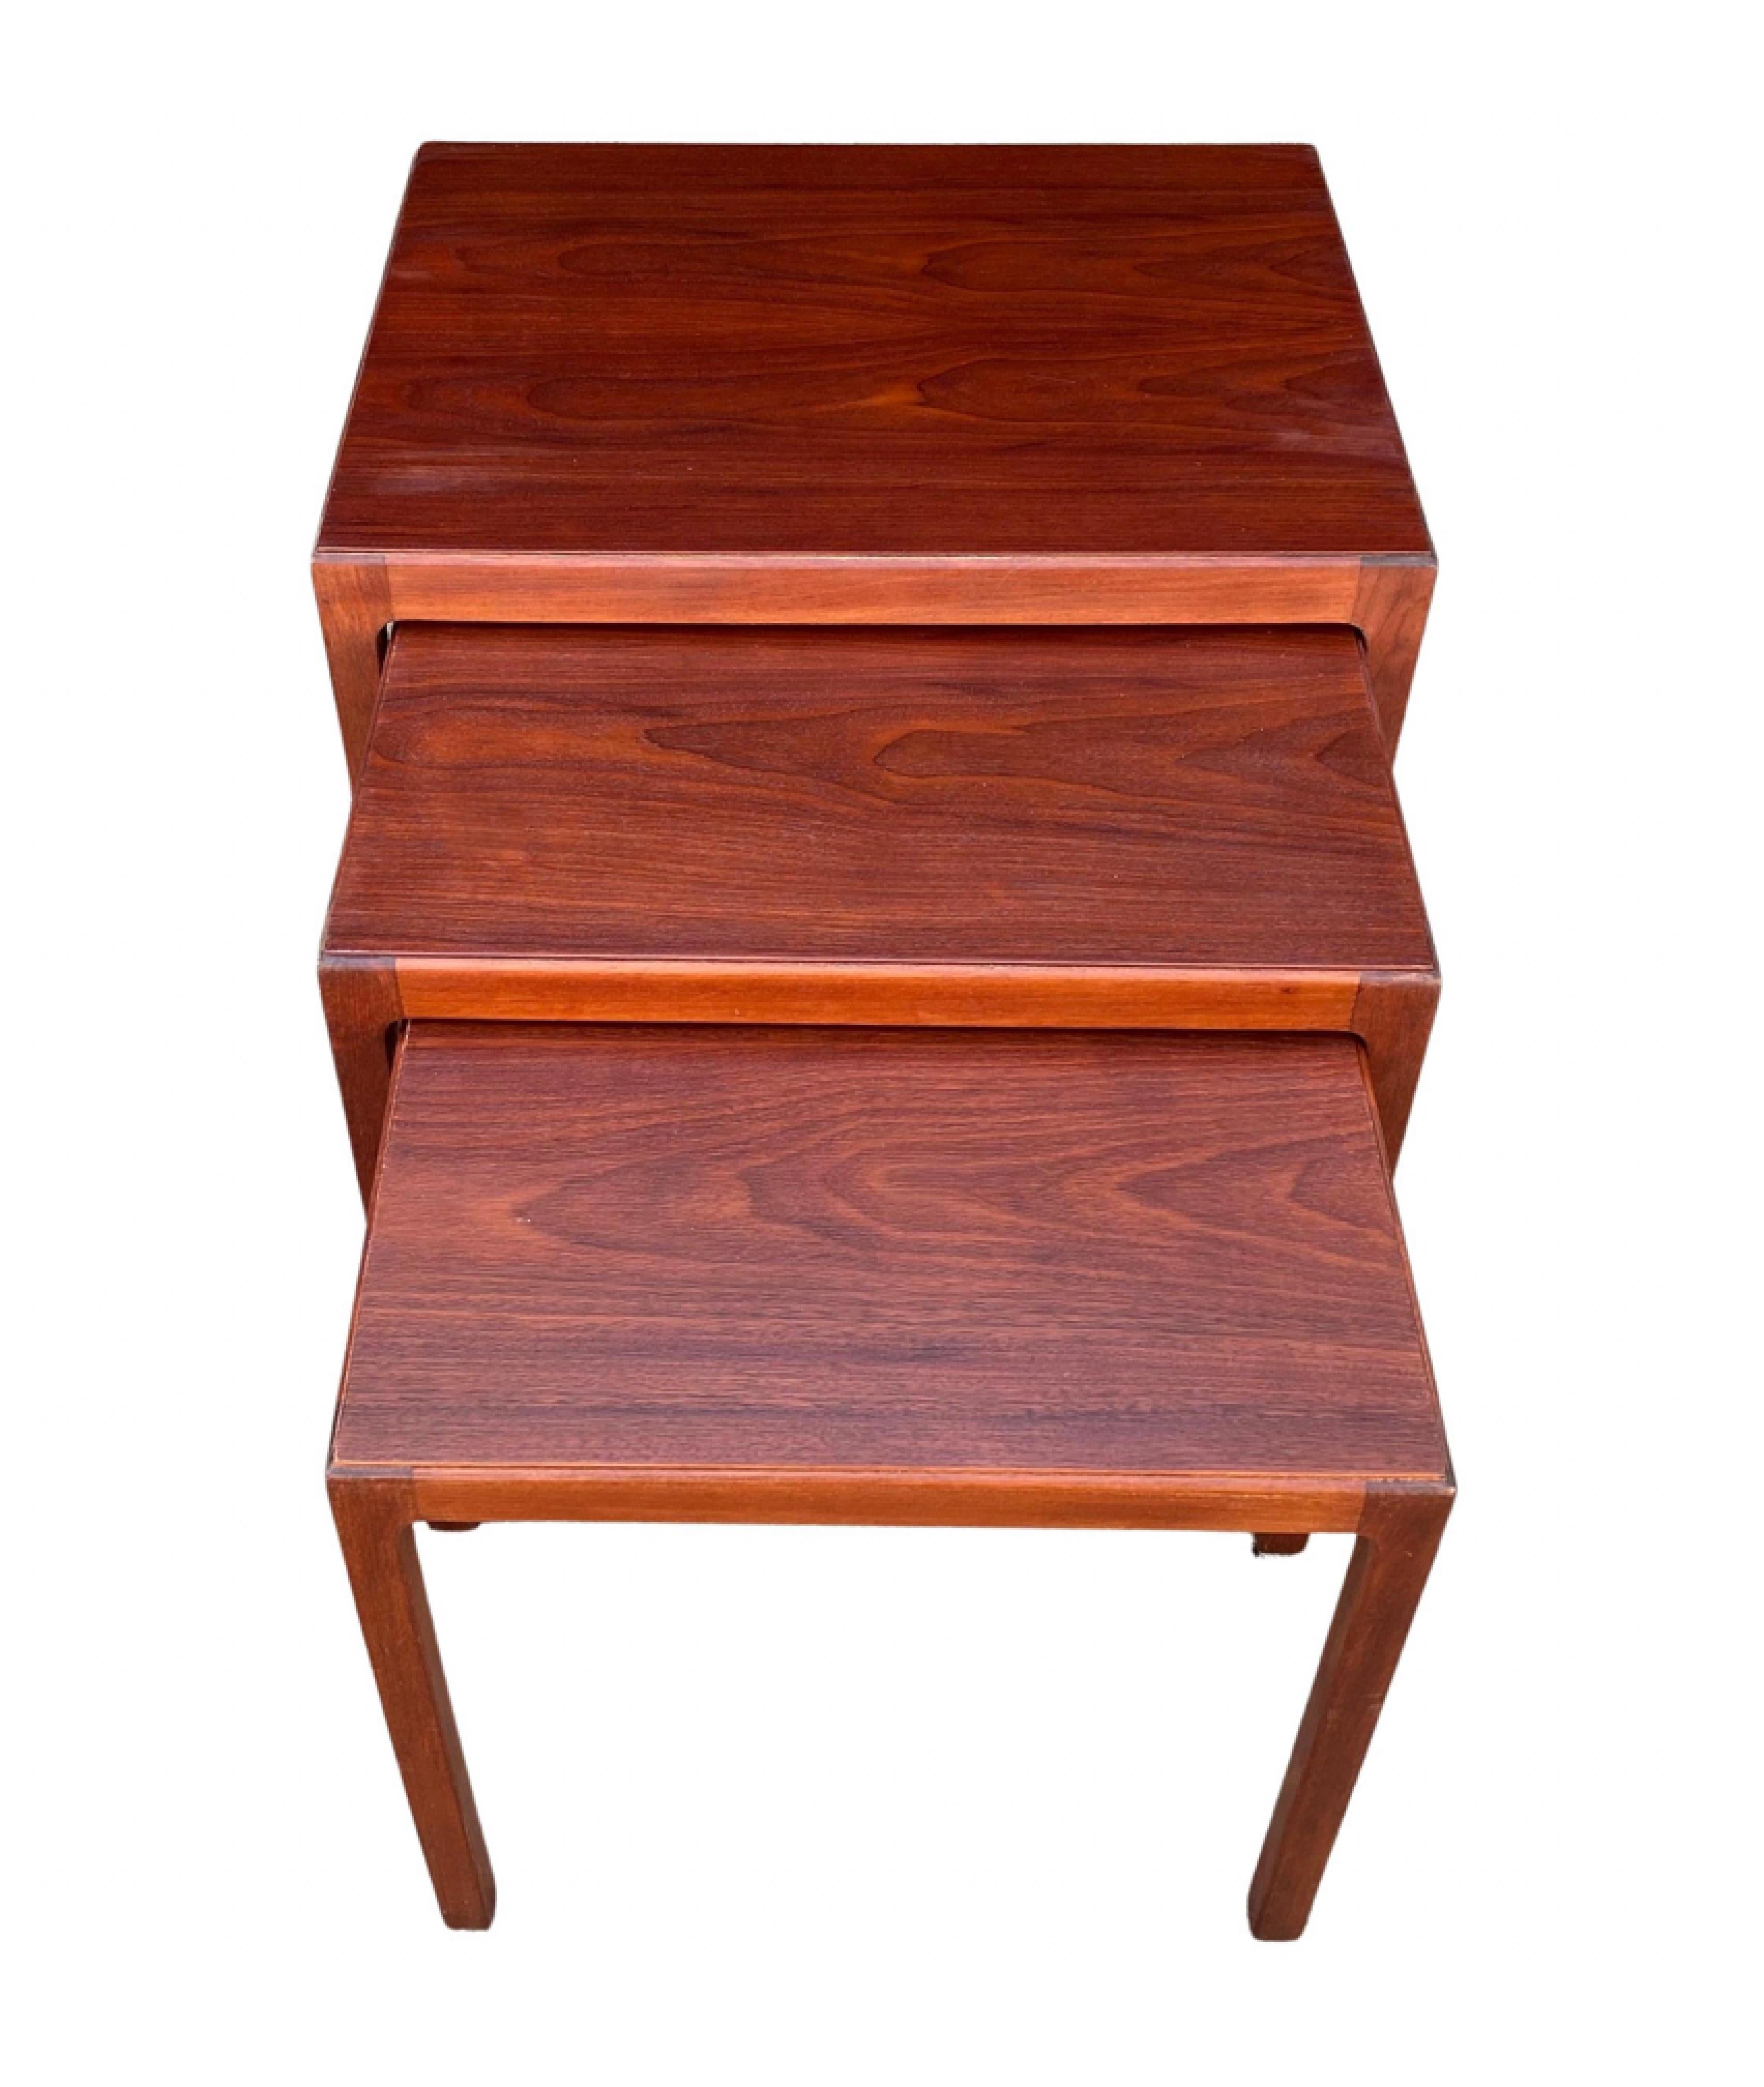 Very elegant set of nesting tables in beautiful mahogany. 

Danish midcentury. In the style of Hans J. Wegner and Johannes Andersen.

Excellent condition.